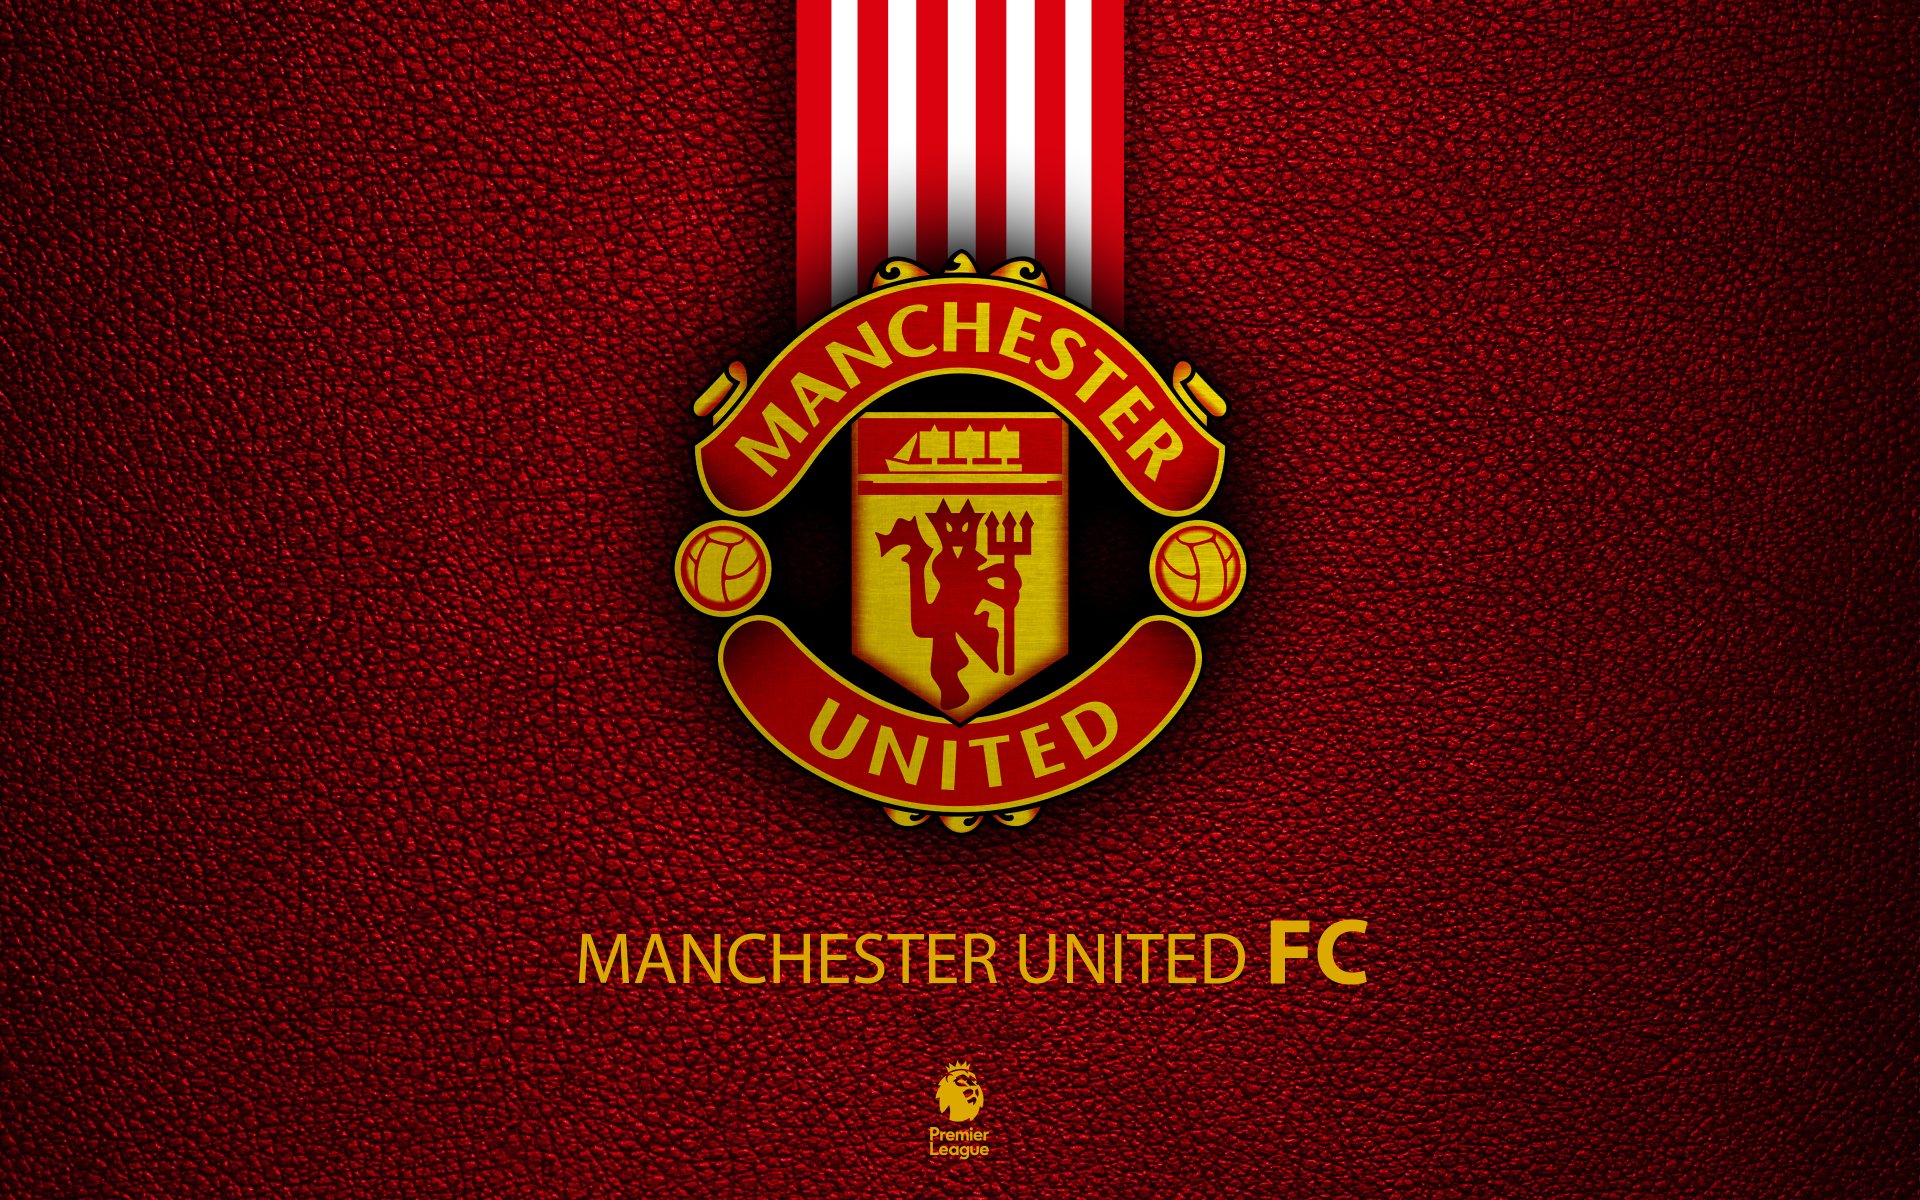 50 4k Ultra Hd Manchester United F C Wallpapers Background Images Wallpaper Abyss Manchester united ultra hd desktop background wallpaper for 4k uhd. 50 4k ultra hd manchester united f c